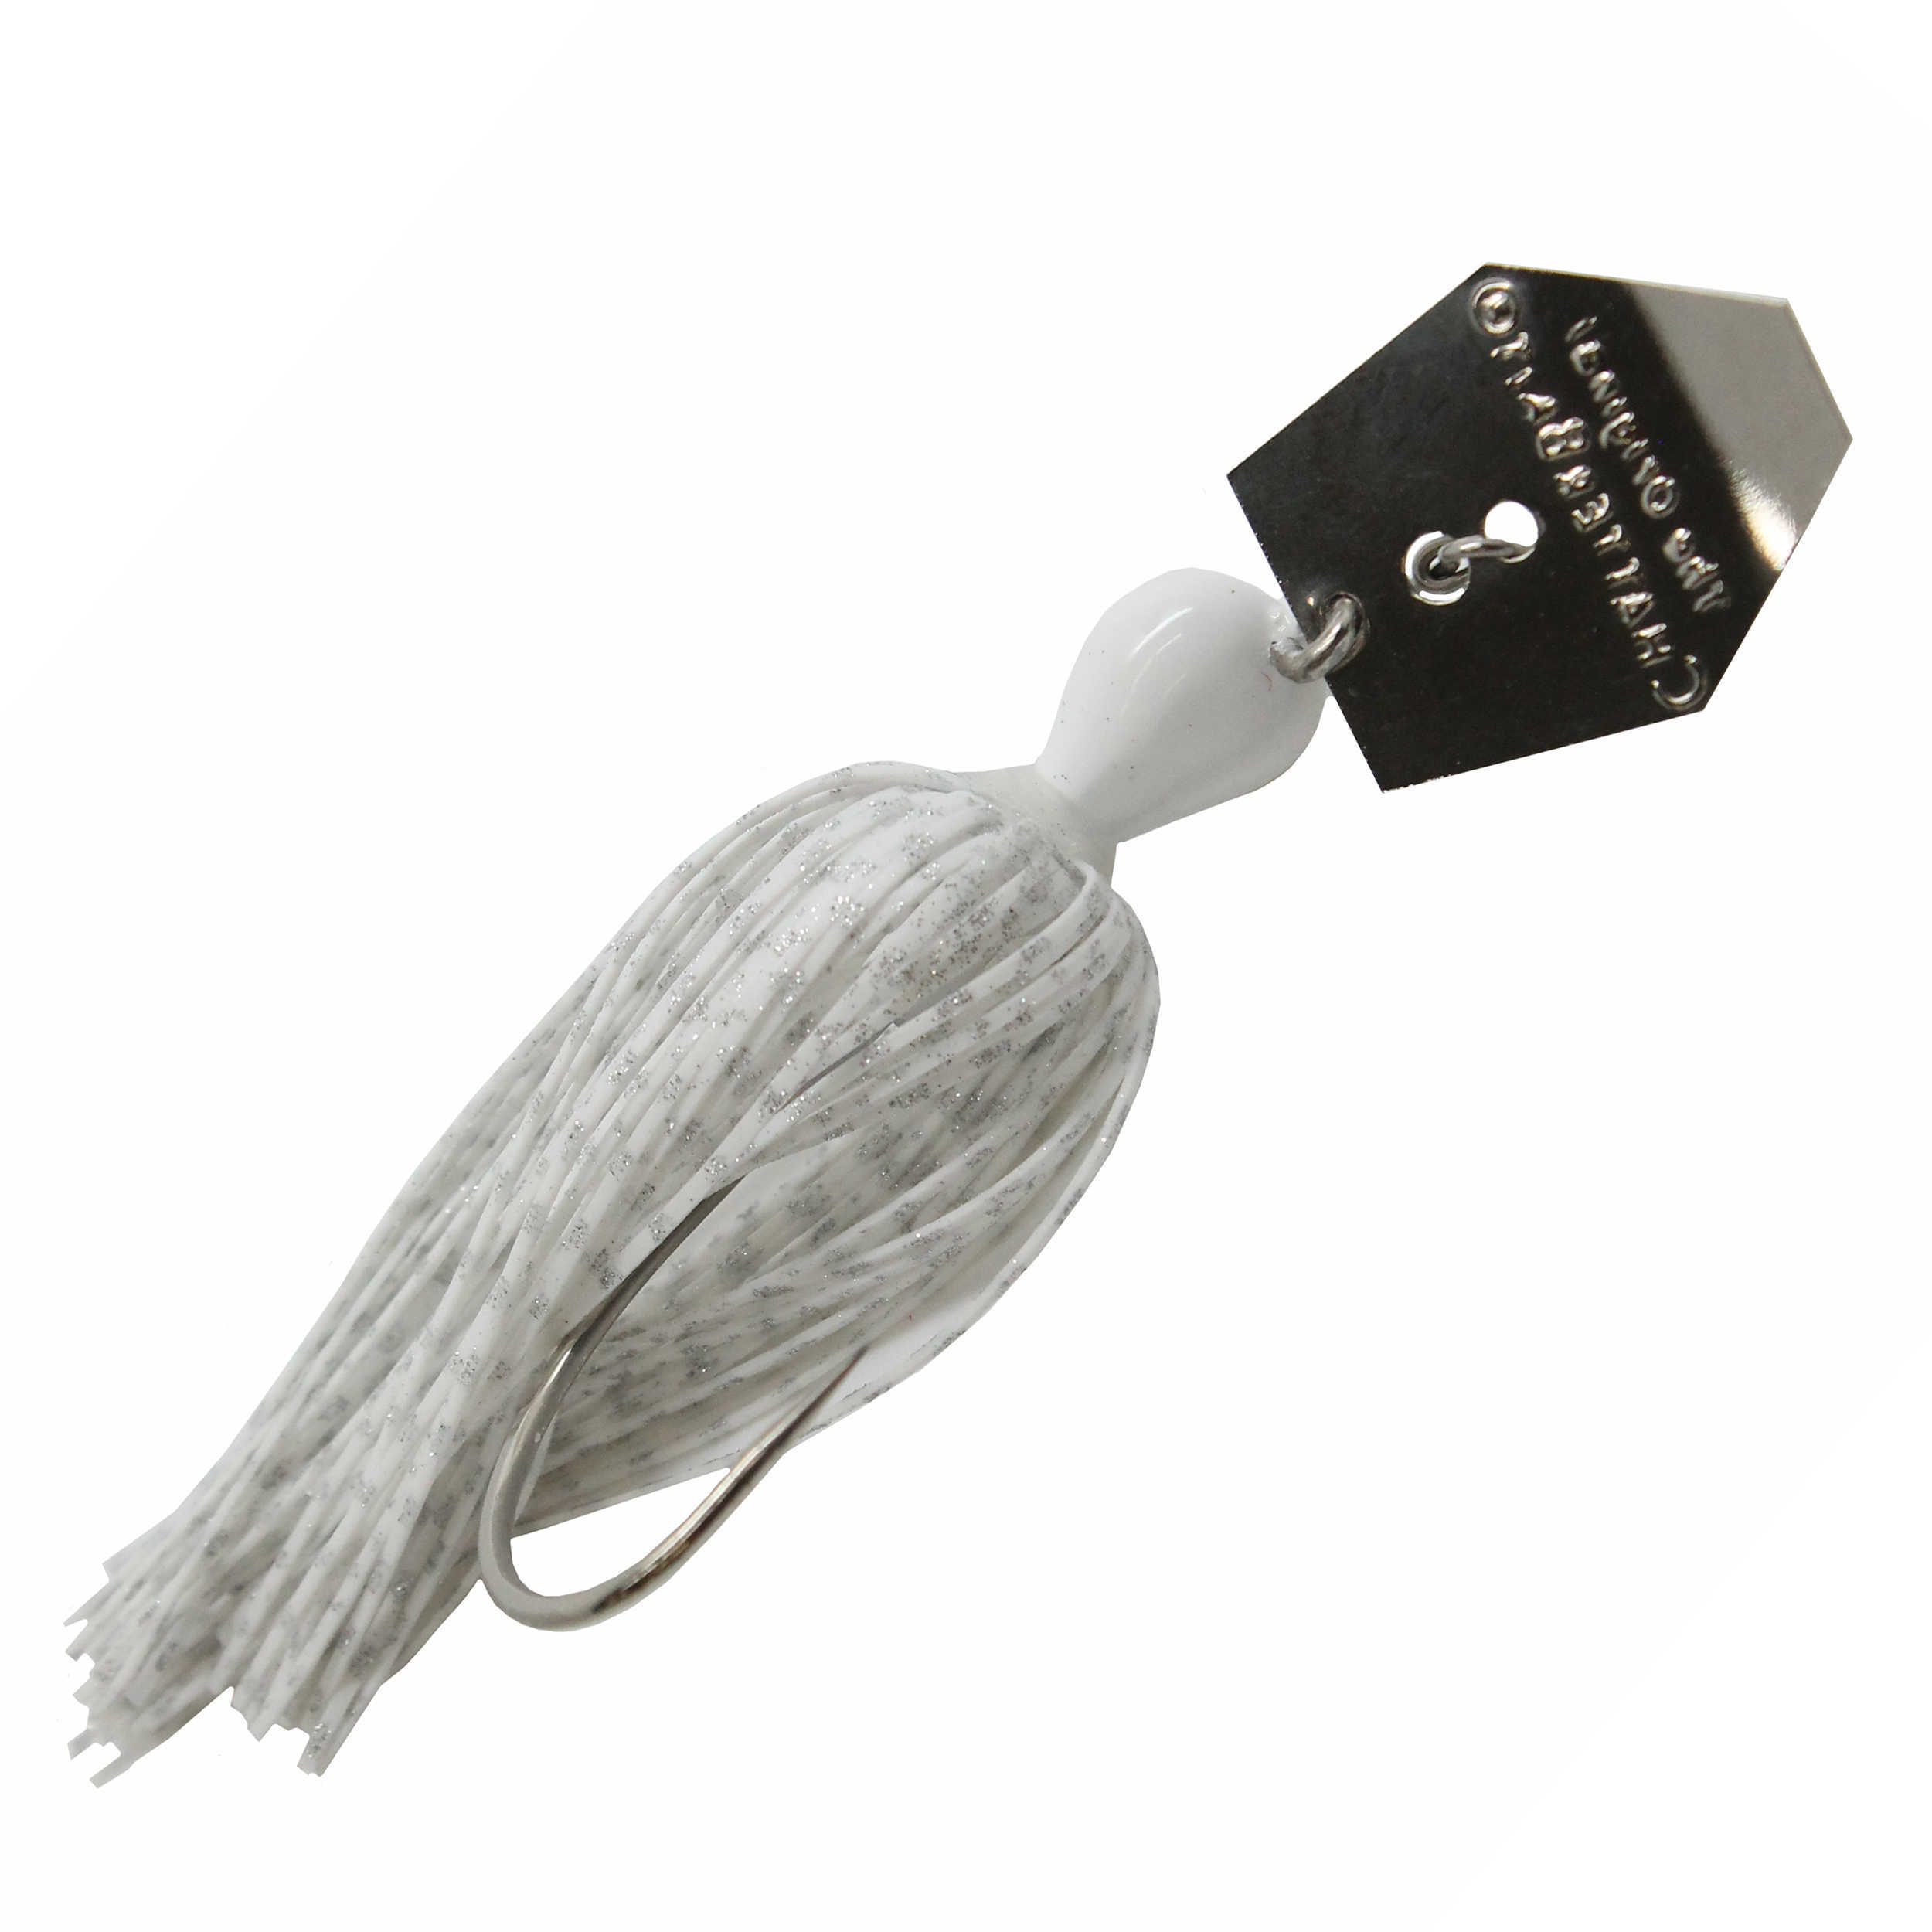 Z-Man / Chatterbait Bait 3/8 Ounce White Lure Md: CB38-08